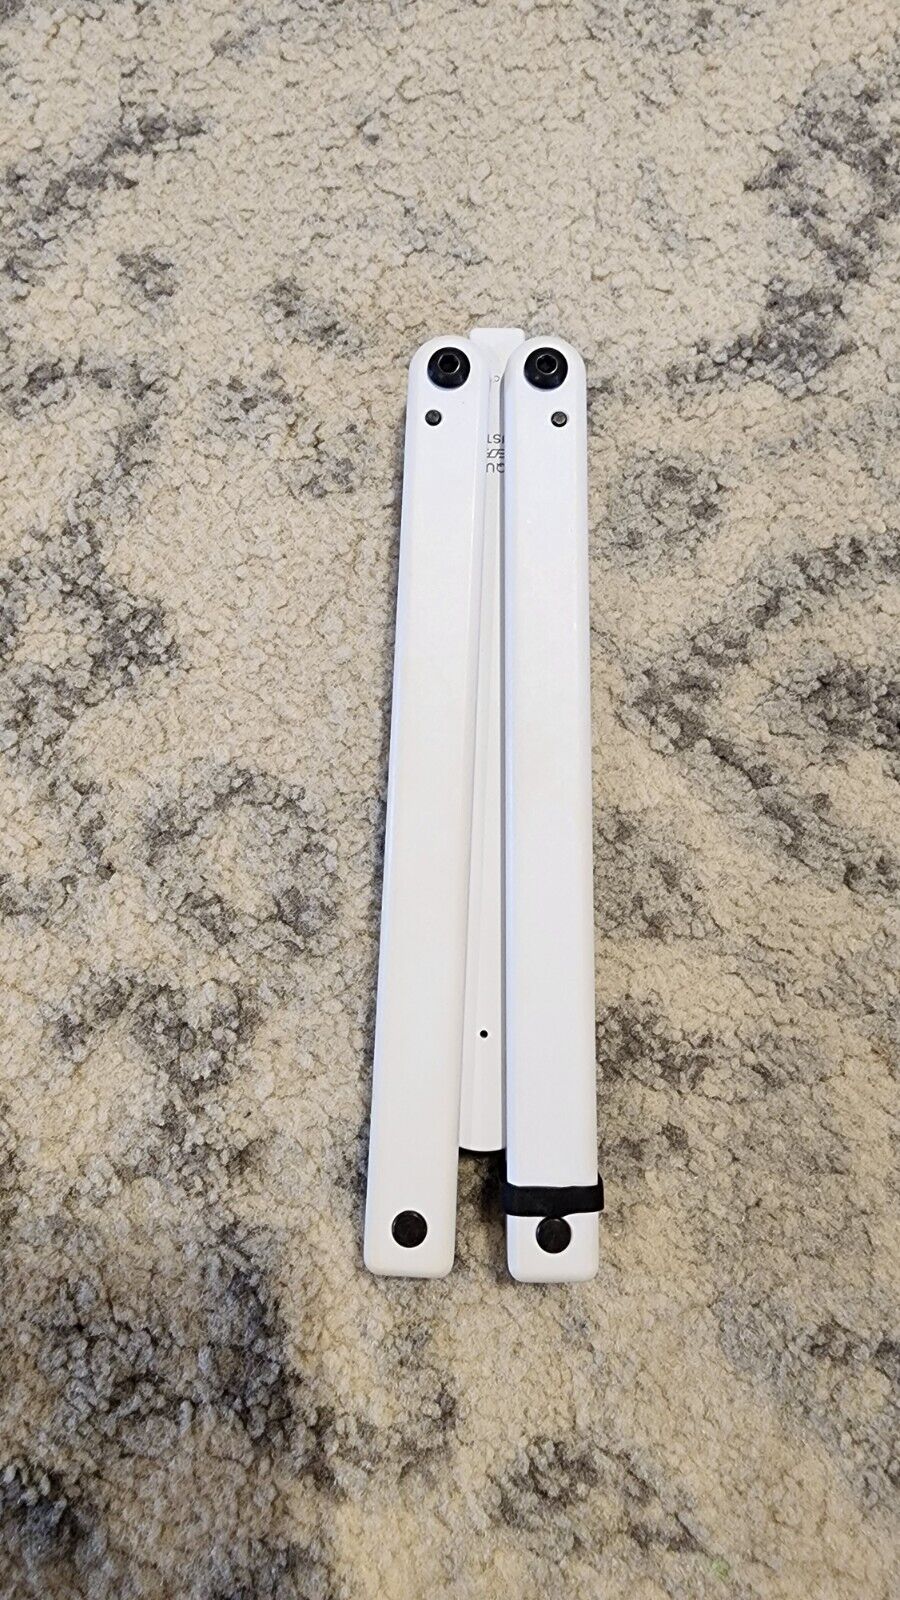 Squiddy Trainer  Squid Industries  White  GOOD PREOWNED CONDITION 